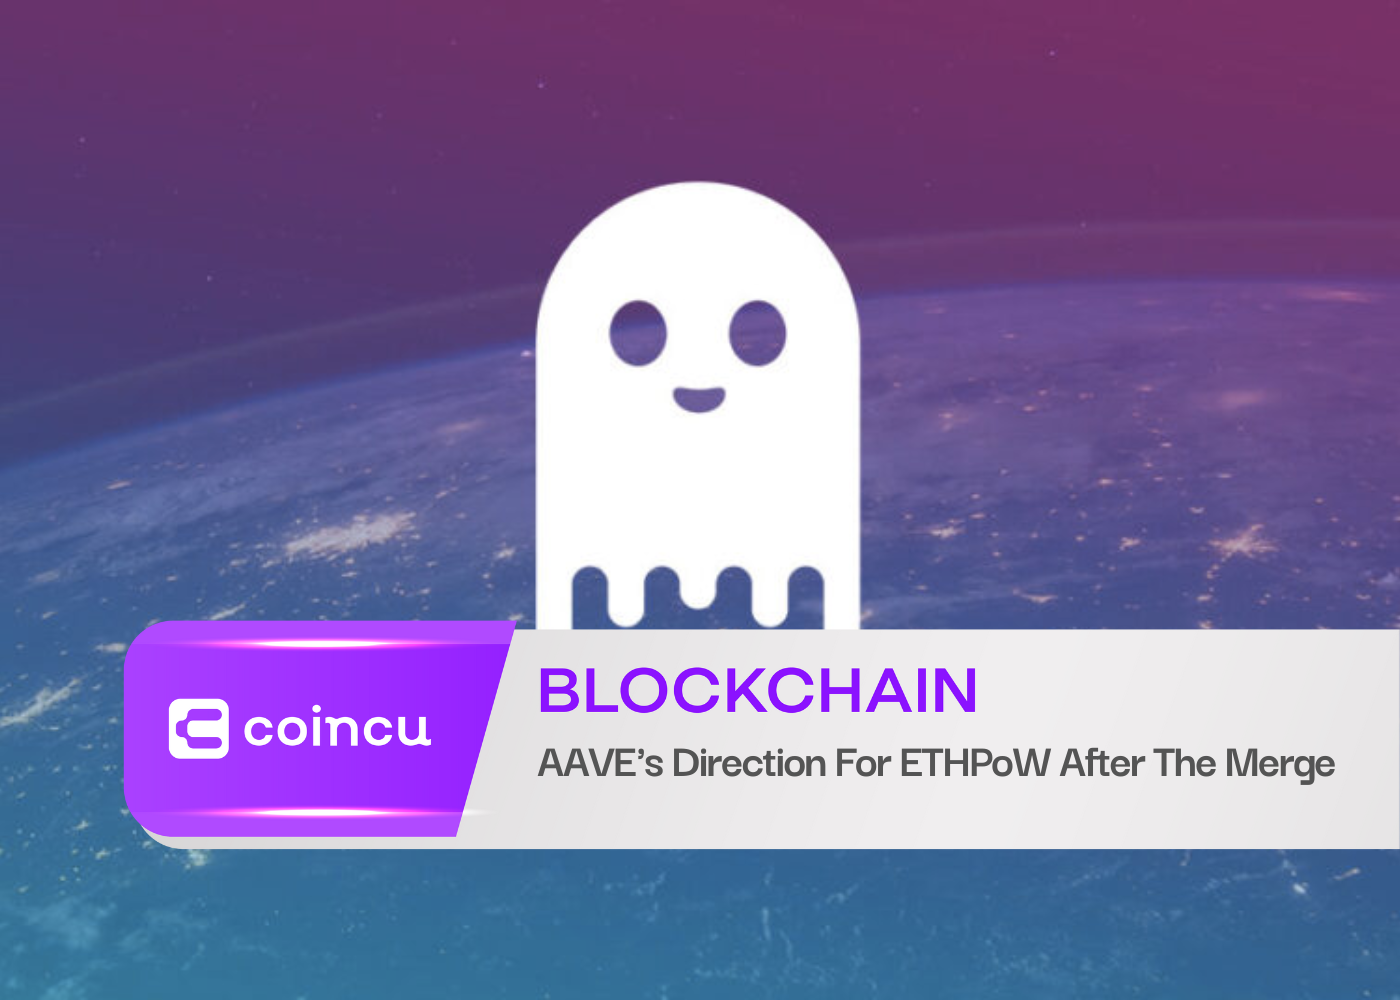 AAVE's Direction For ETHPoW After The Merge